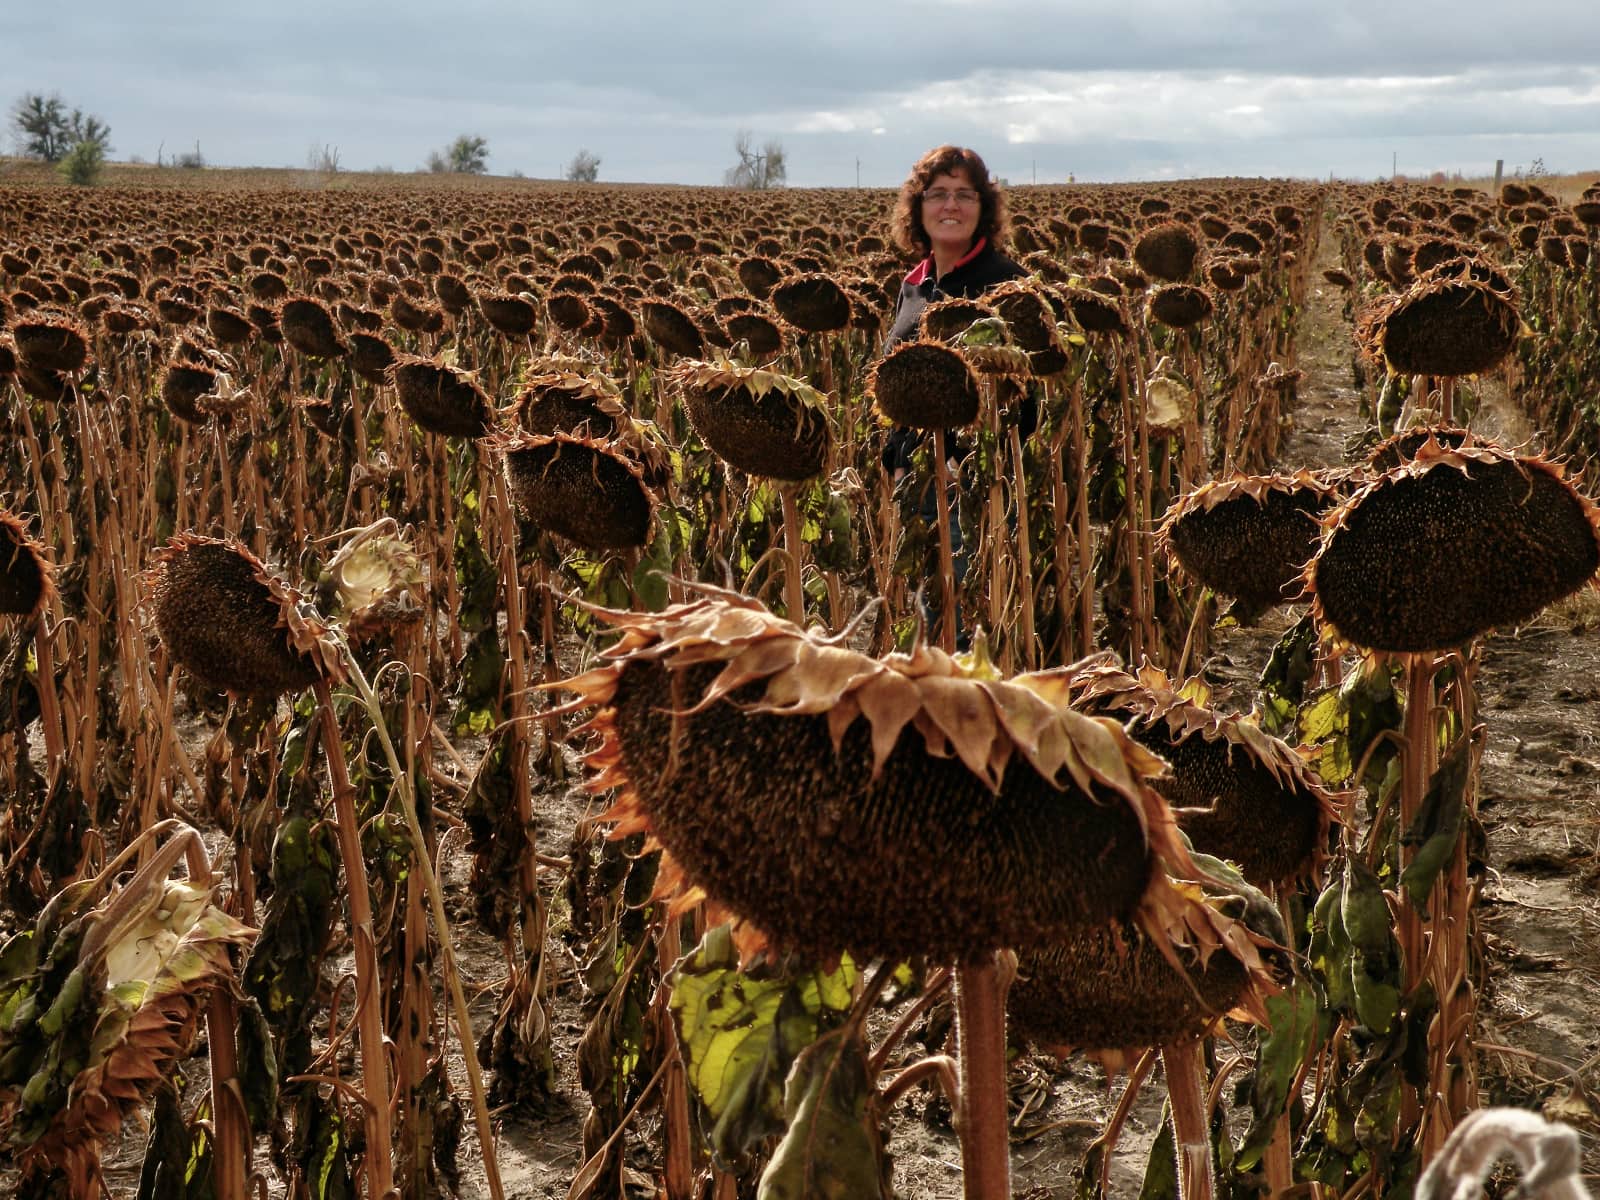 Woman standing amongst wilted sunflower plants